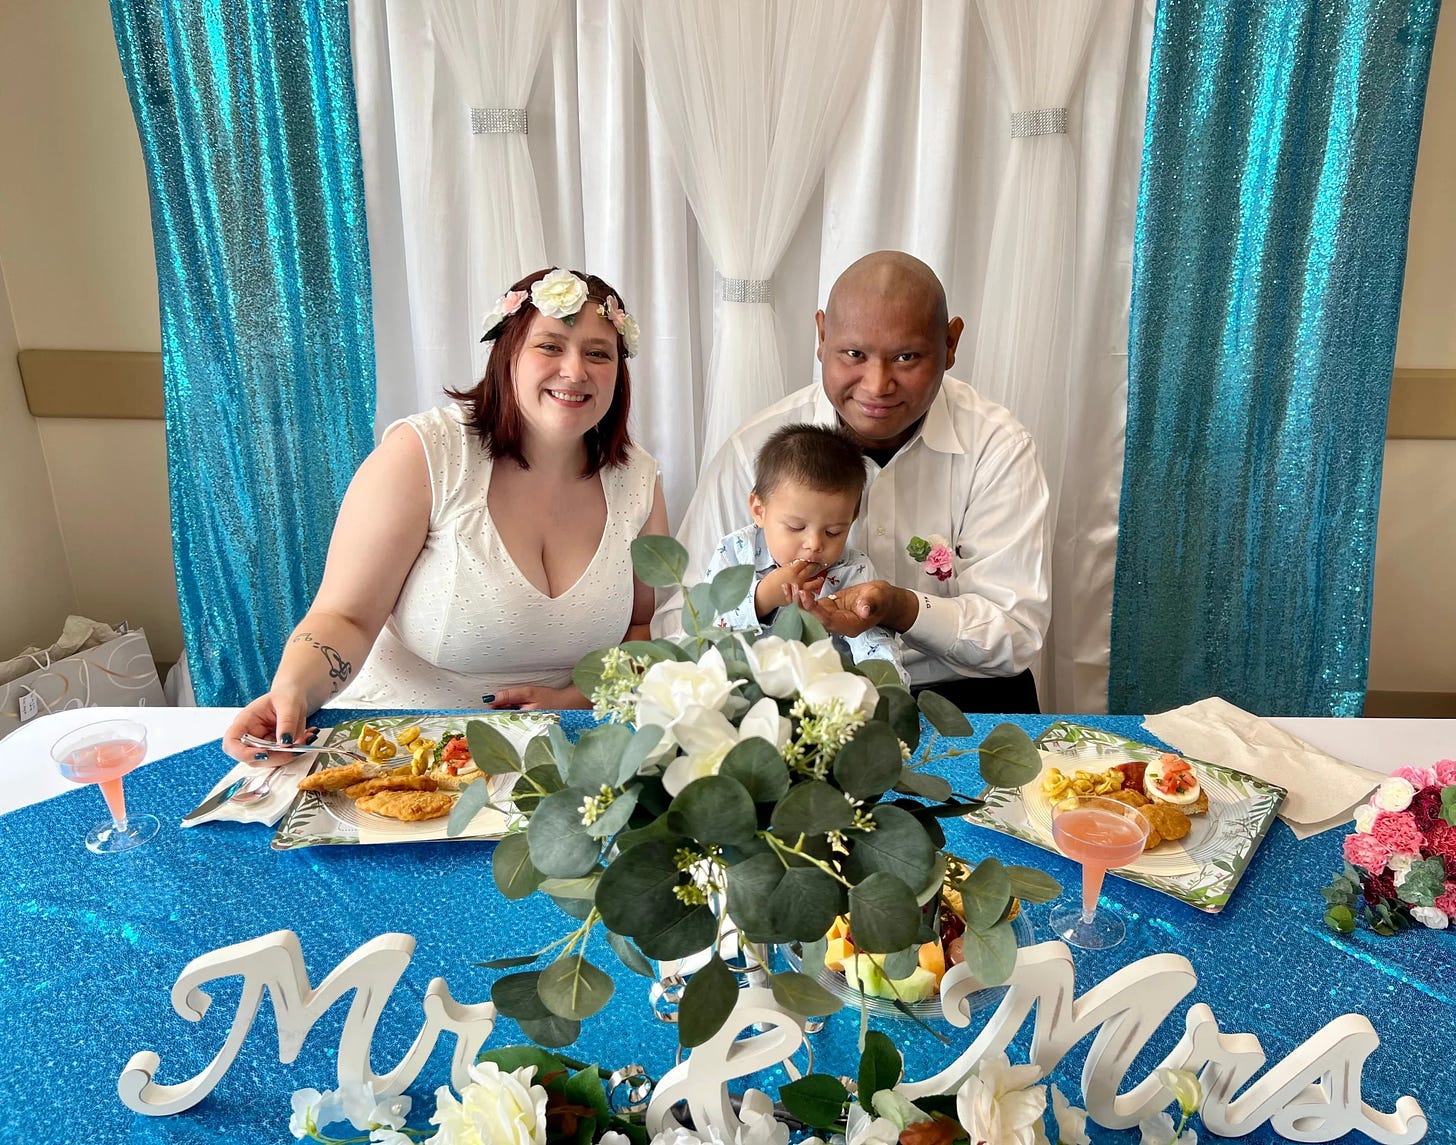 Alex Santos married his fiancée Heather in his hospital room with help of hospital staff. The couple have a 2-year-old son. Santos lost his cancer battle on Aug. 8, 2023, eight months after he was diagnosed.